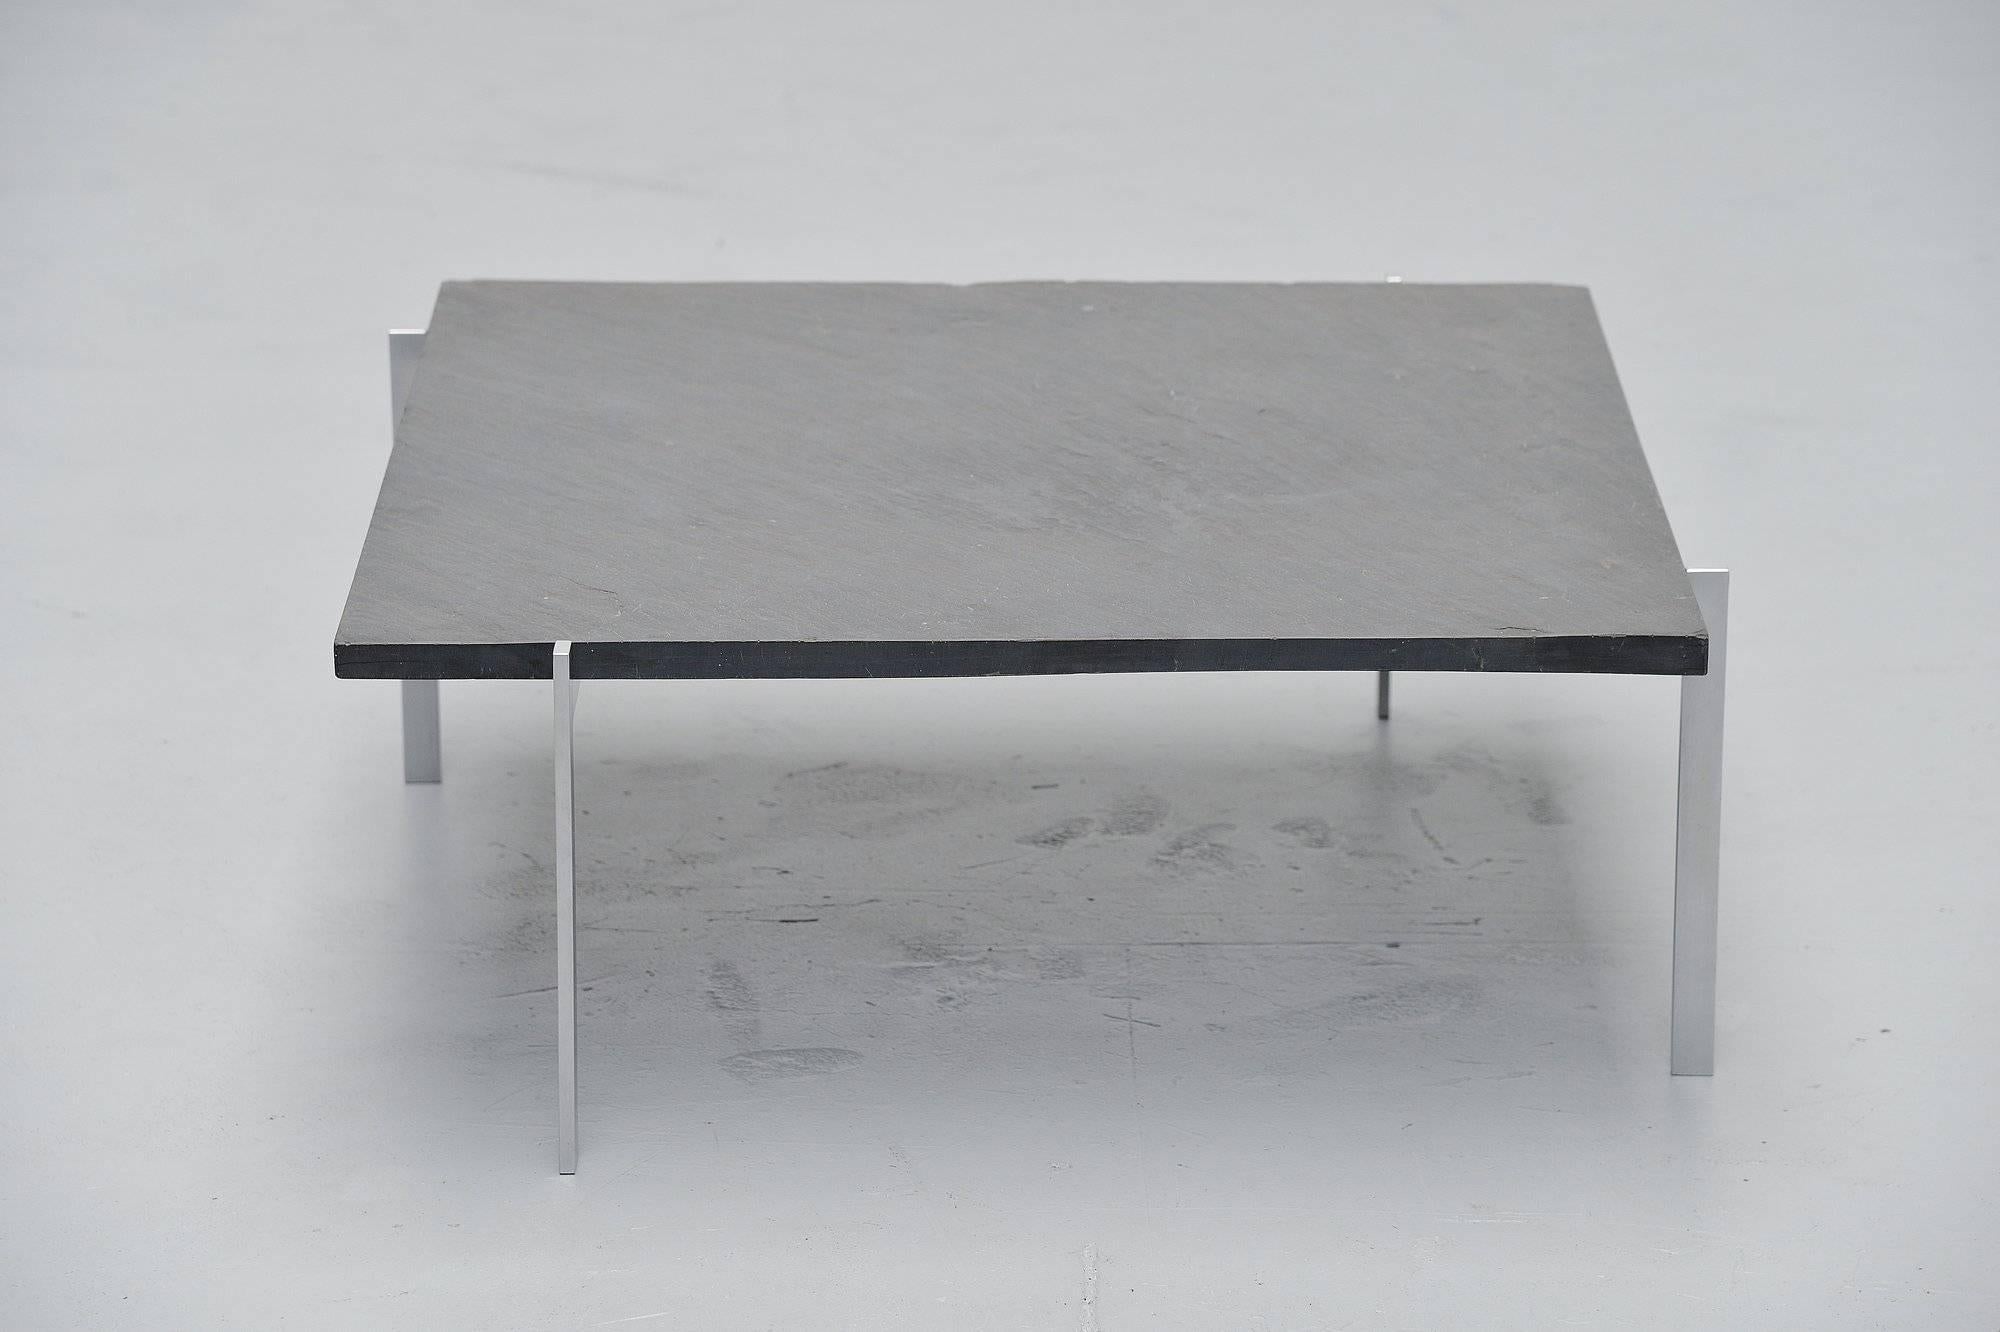 Here for one of the most known designs by Poul Kjaerholm, this coffee table model PK61 designed for E Kold Christensen, Denmark 1956. Poul Kjaerholm wanted to sell the production rights to Fritz Hansen at first but they didn’t want it. After a great